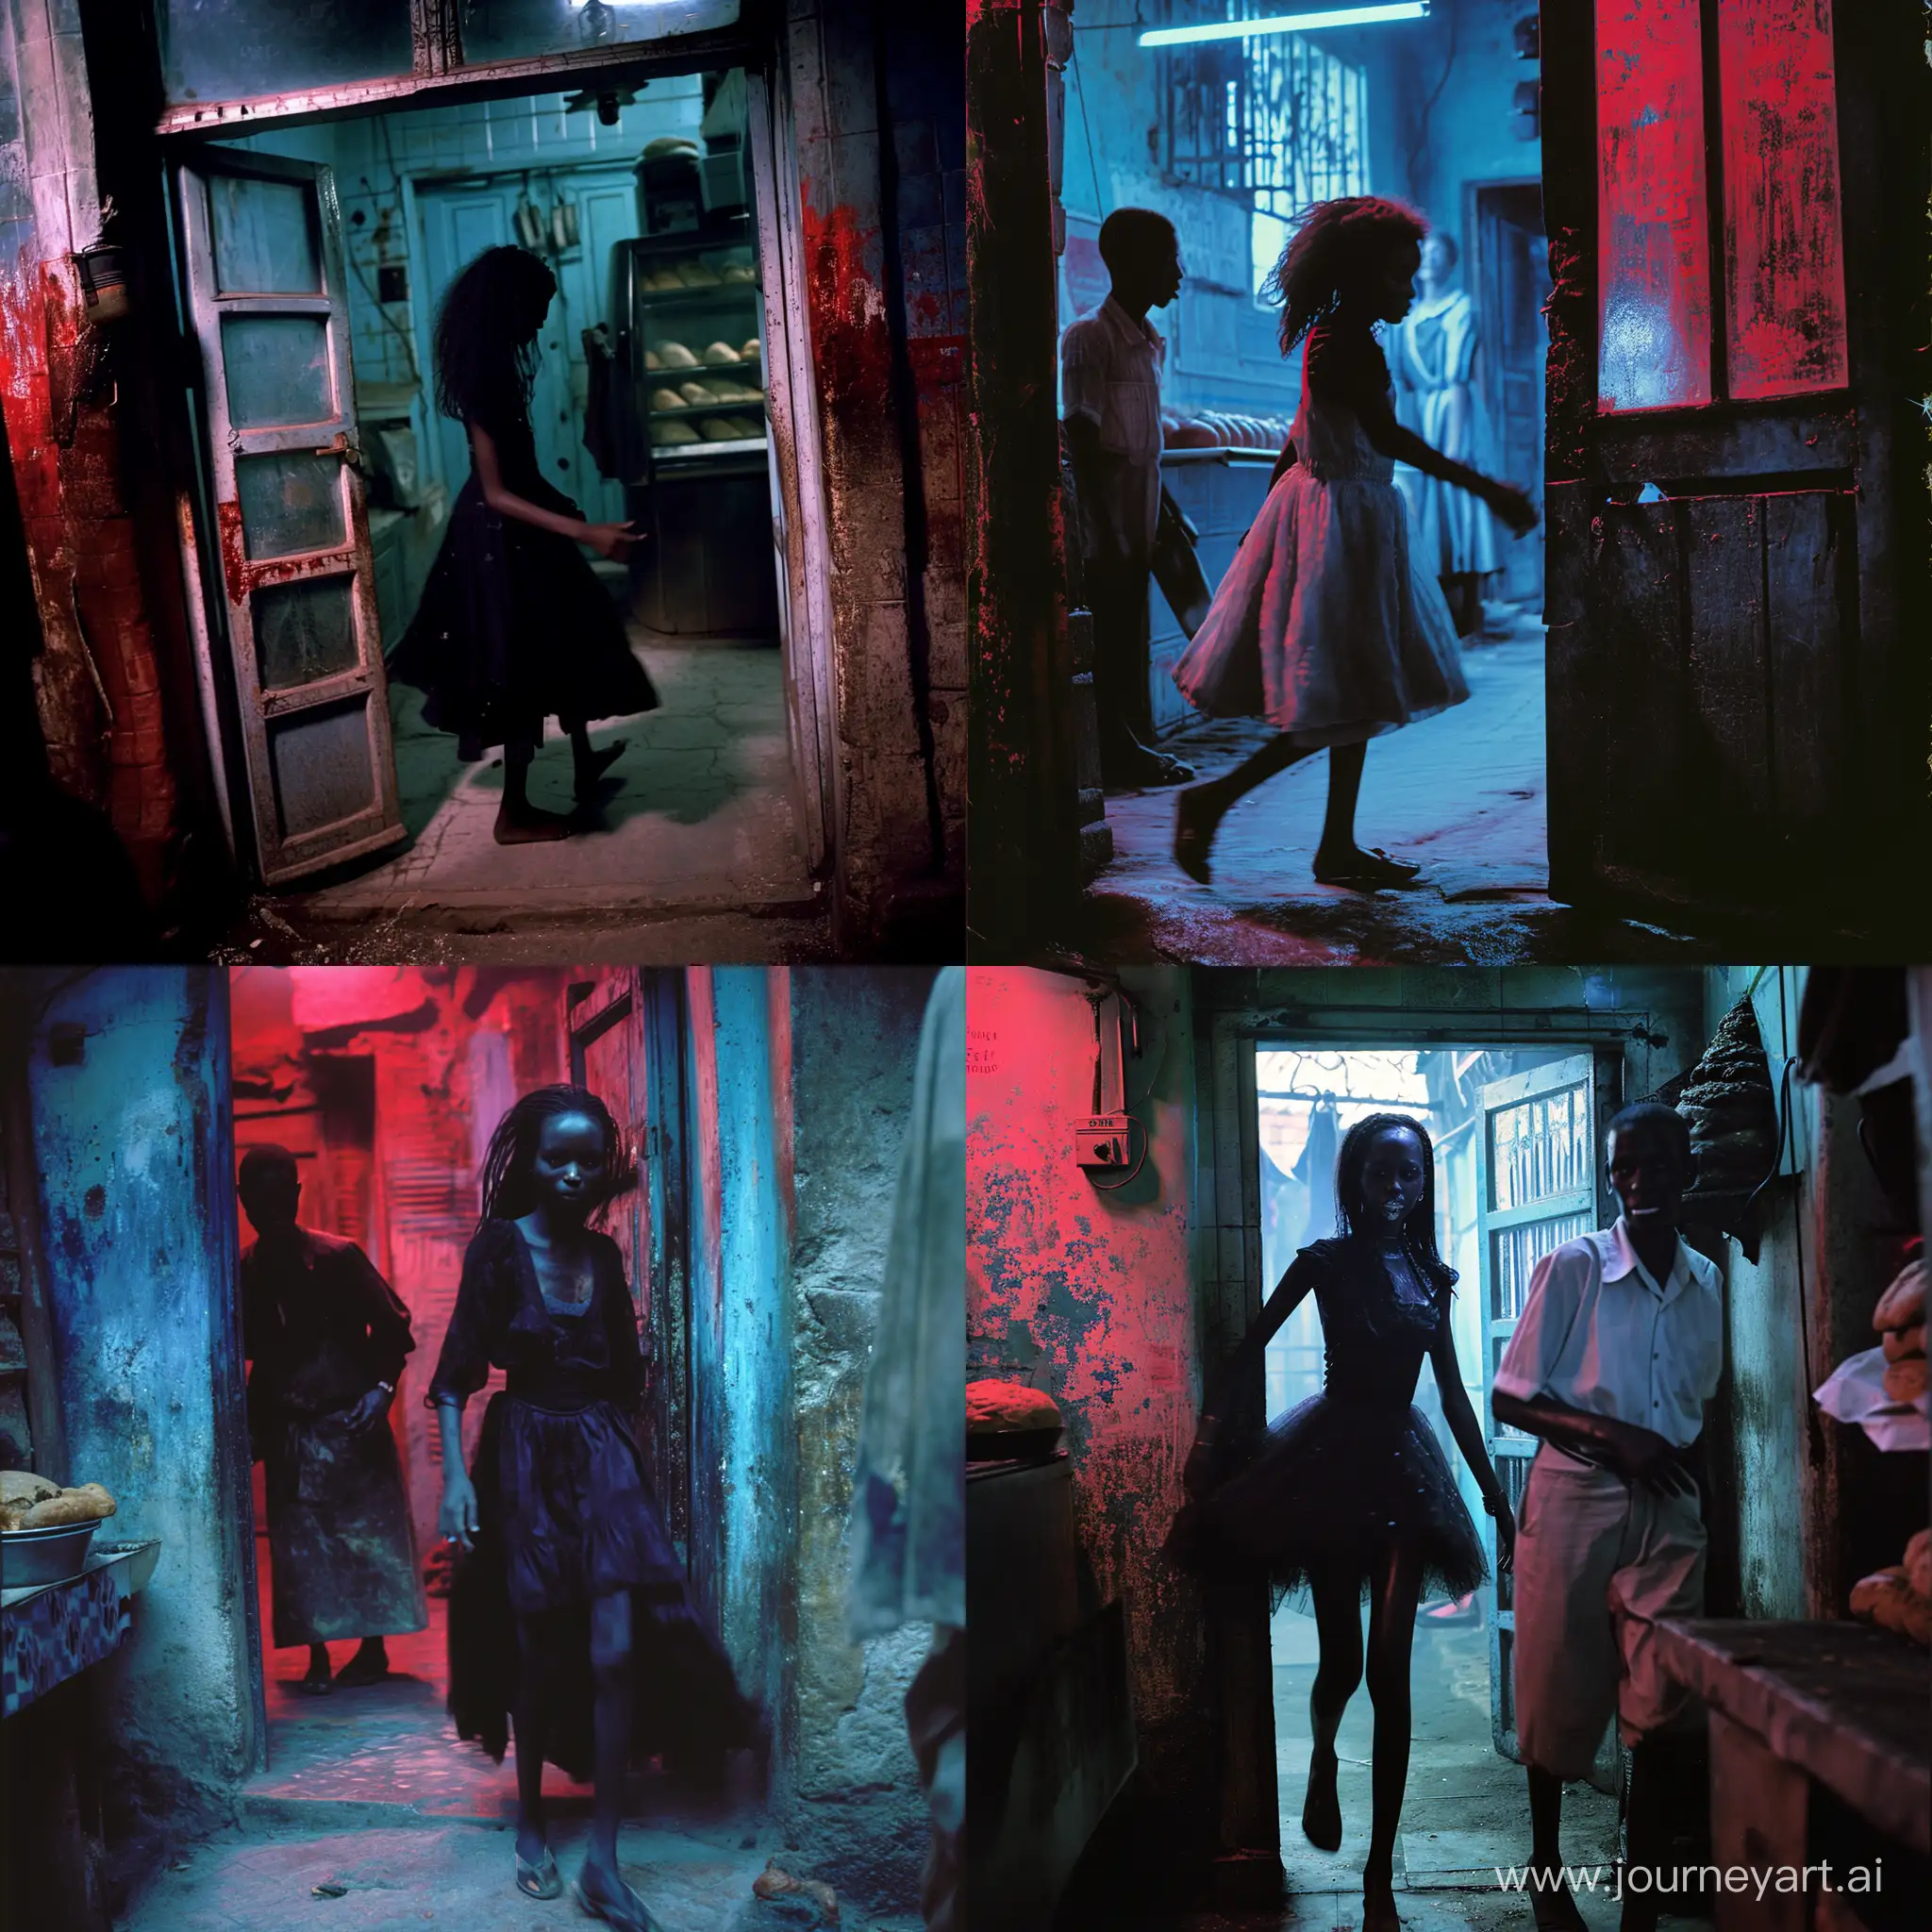 A shot taken in 1998 that shows a gothic ethiopian girl going to the bakery to buy some bread for her hungry mom, she's walking through the door in slow-motion very confident of herself and the baker is looking at her with acute fear. The quality of the scene is cleary grainy and it has intense tones of red and blue. The angle of the camera is a bit lower.